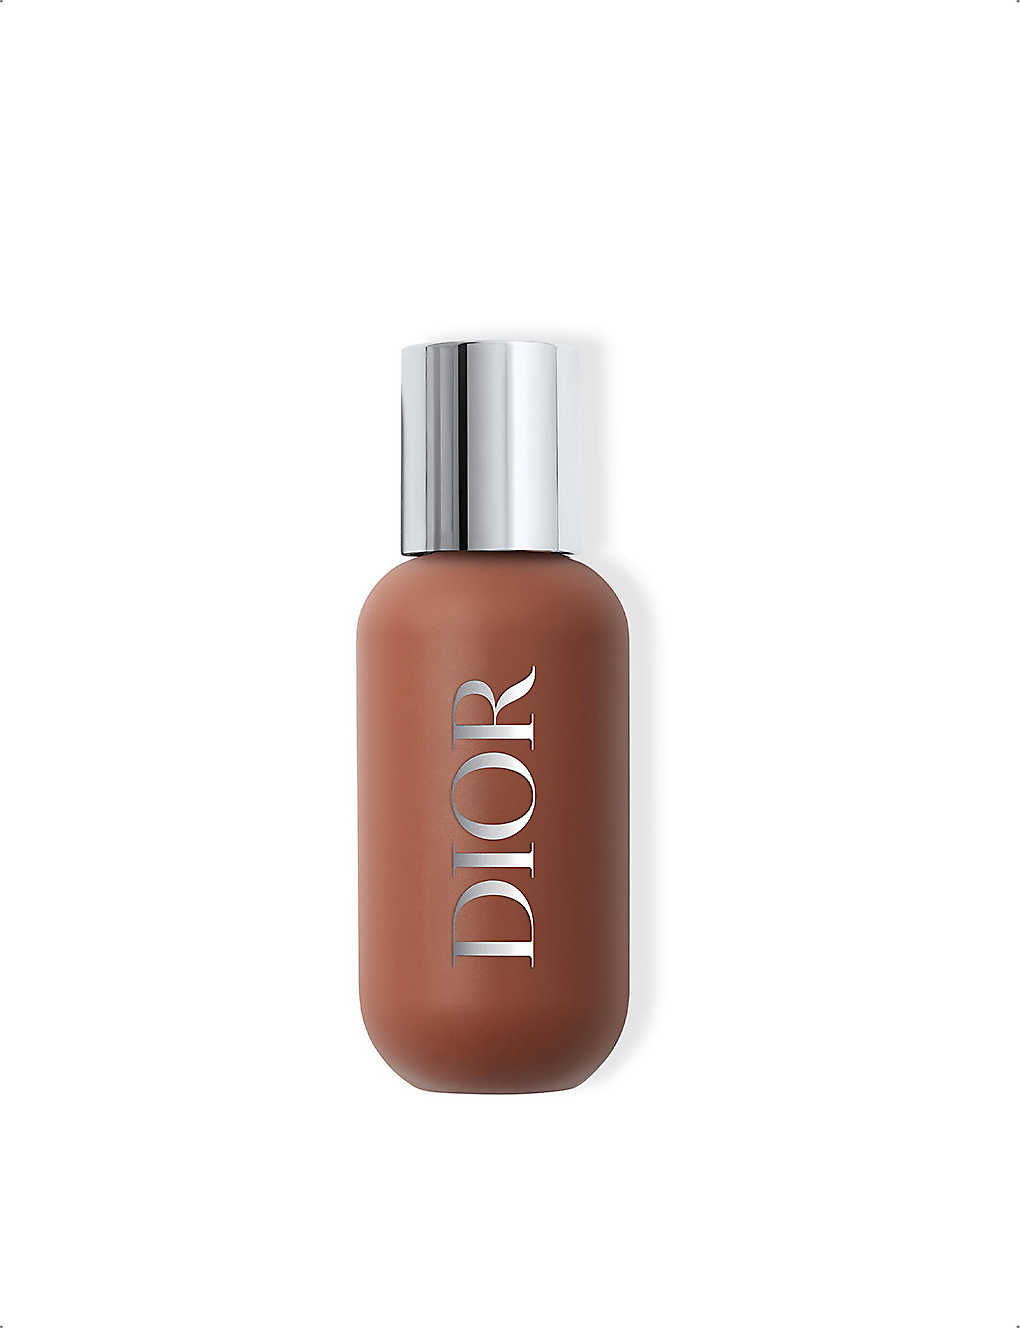 Dior Backstage Face & Body Foundation 50ml In 7.5n